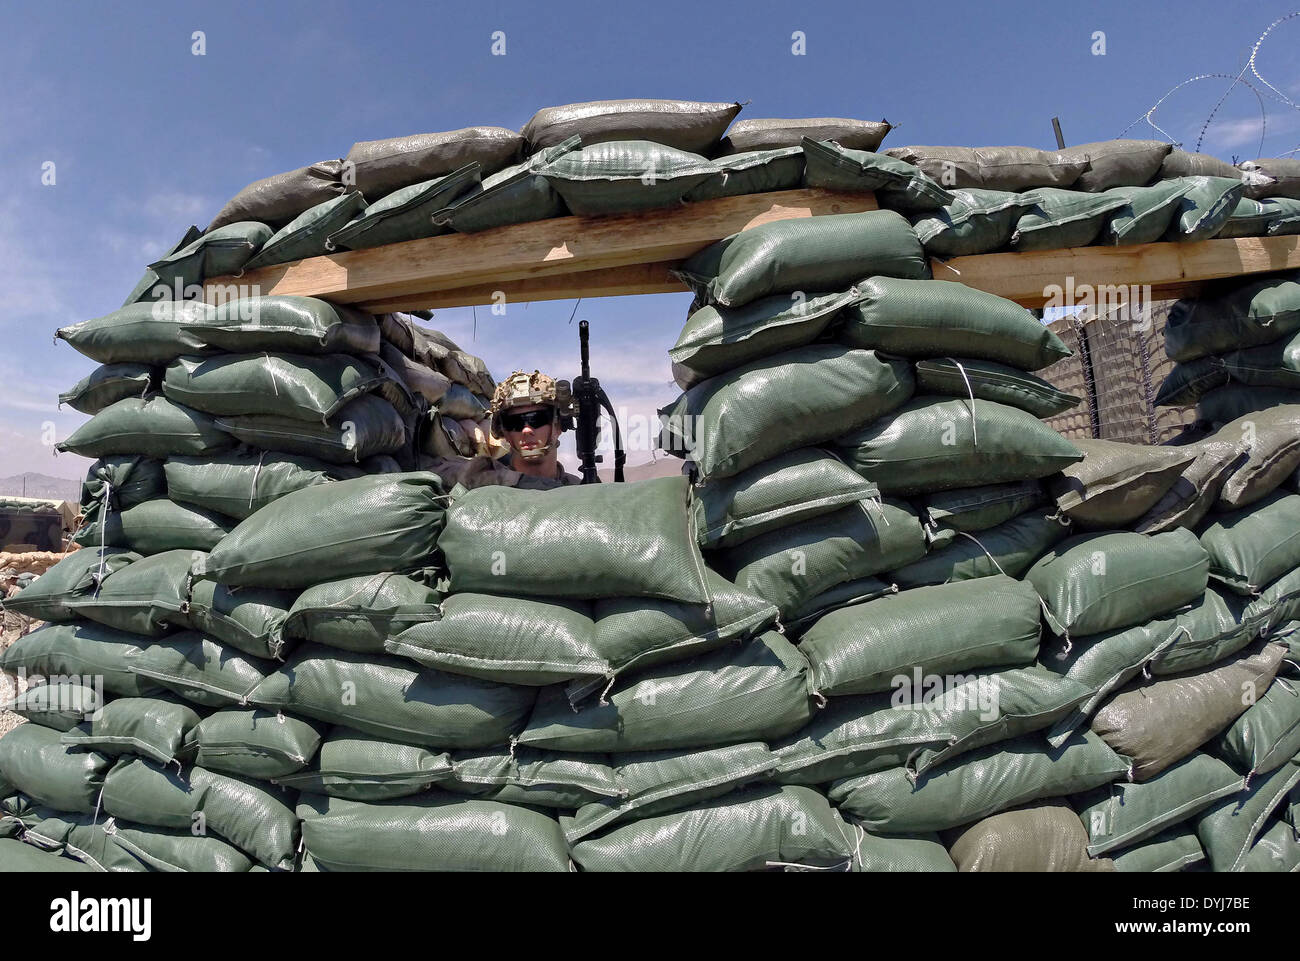 US Army Spc. Josh Lueken stands watch from a sandbagged bunker April 18, 2014 at Observation Post English, Logar province, Afghanistan. Stock Photo